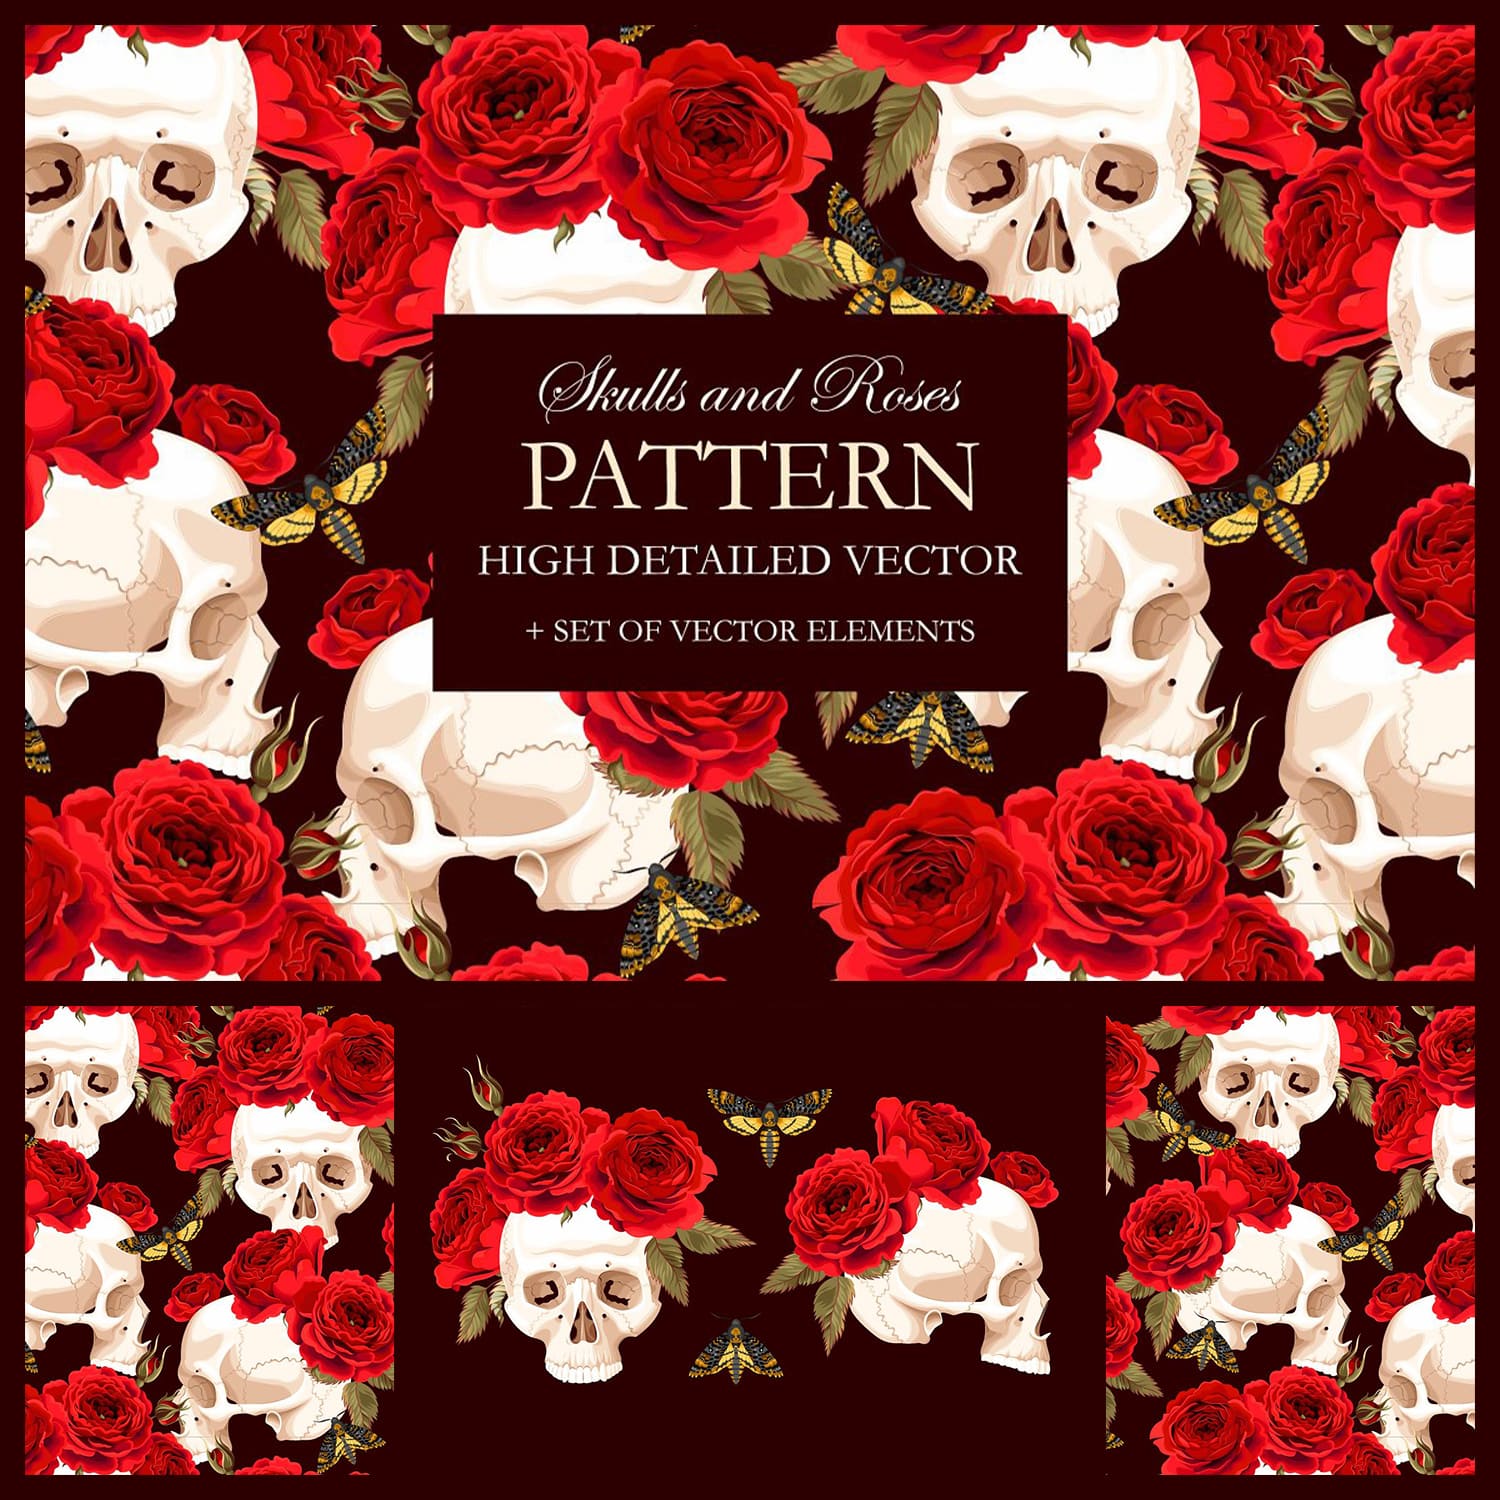 Pattern with Skulls and Roses cover image.